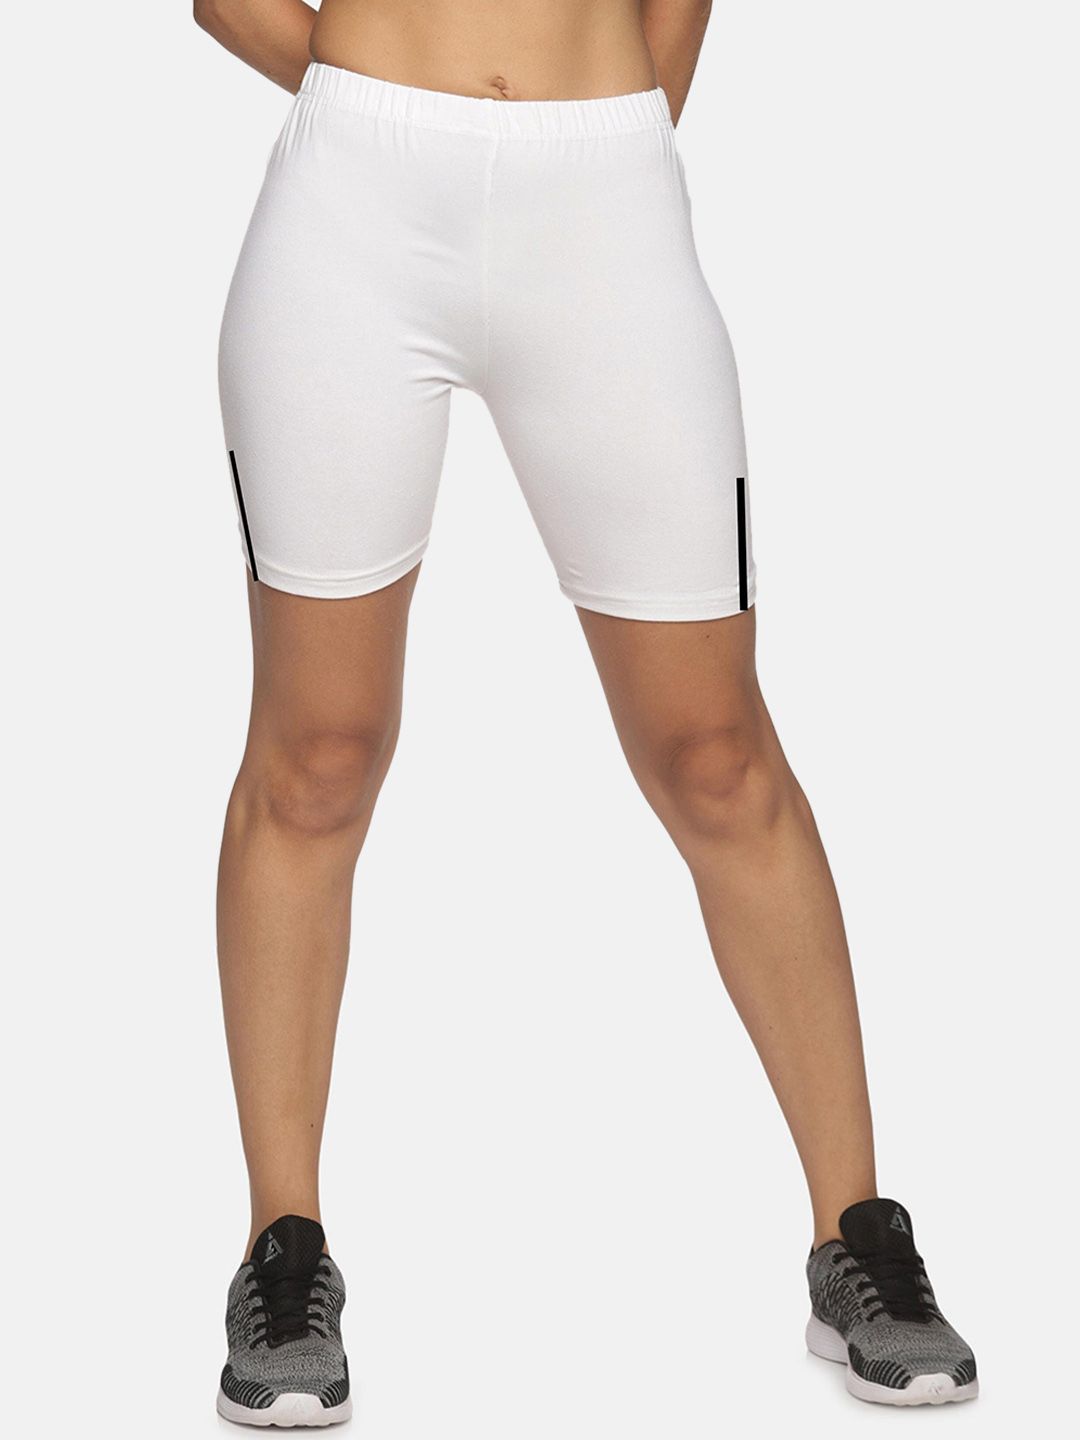 NOT YET by us Women White Slim Fit Cycling Sports Shorts Price in India